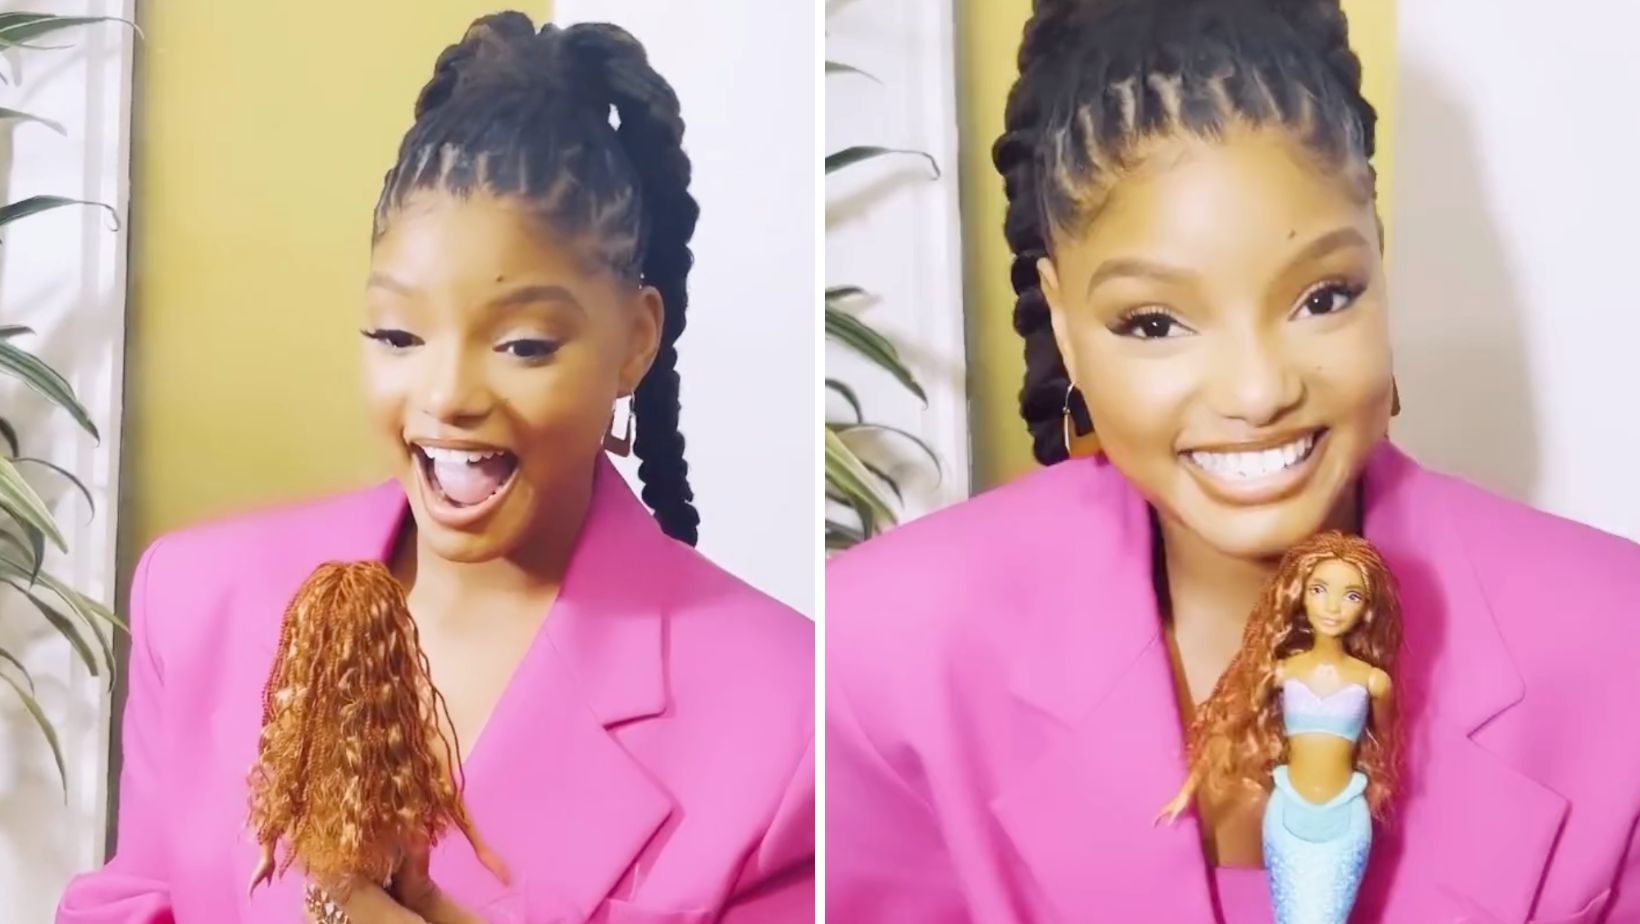 Representation Matters: Halle Bailey Unveils 'The Little Mermaid' Doll That Was Modeled After Her in An Emotional Video